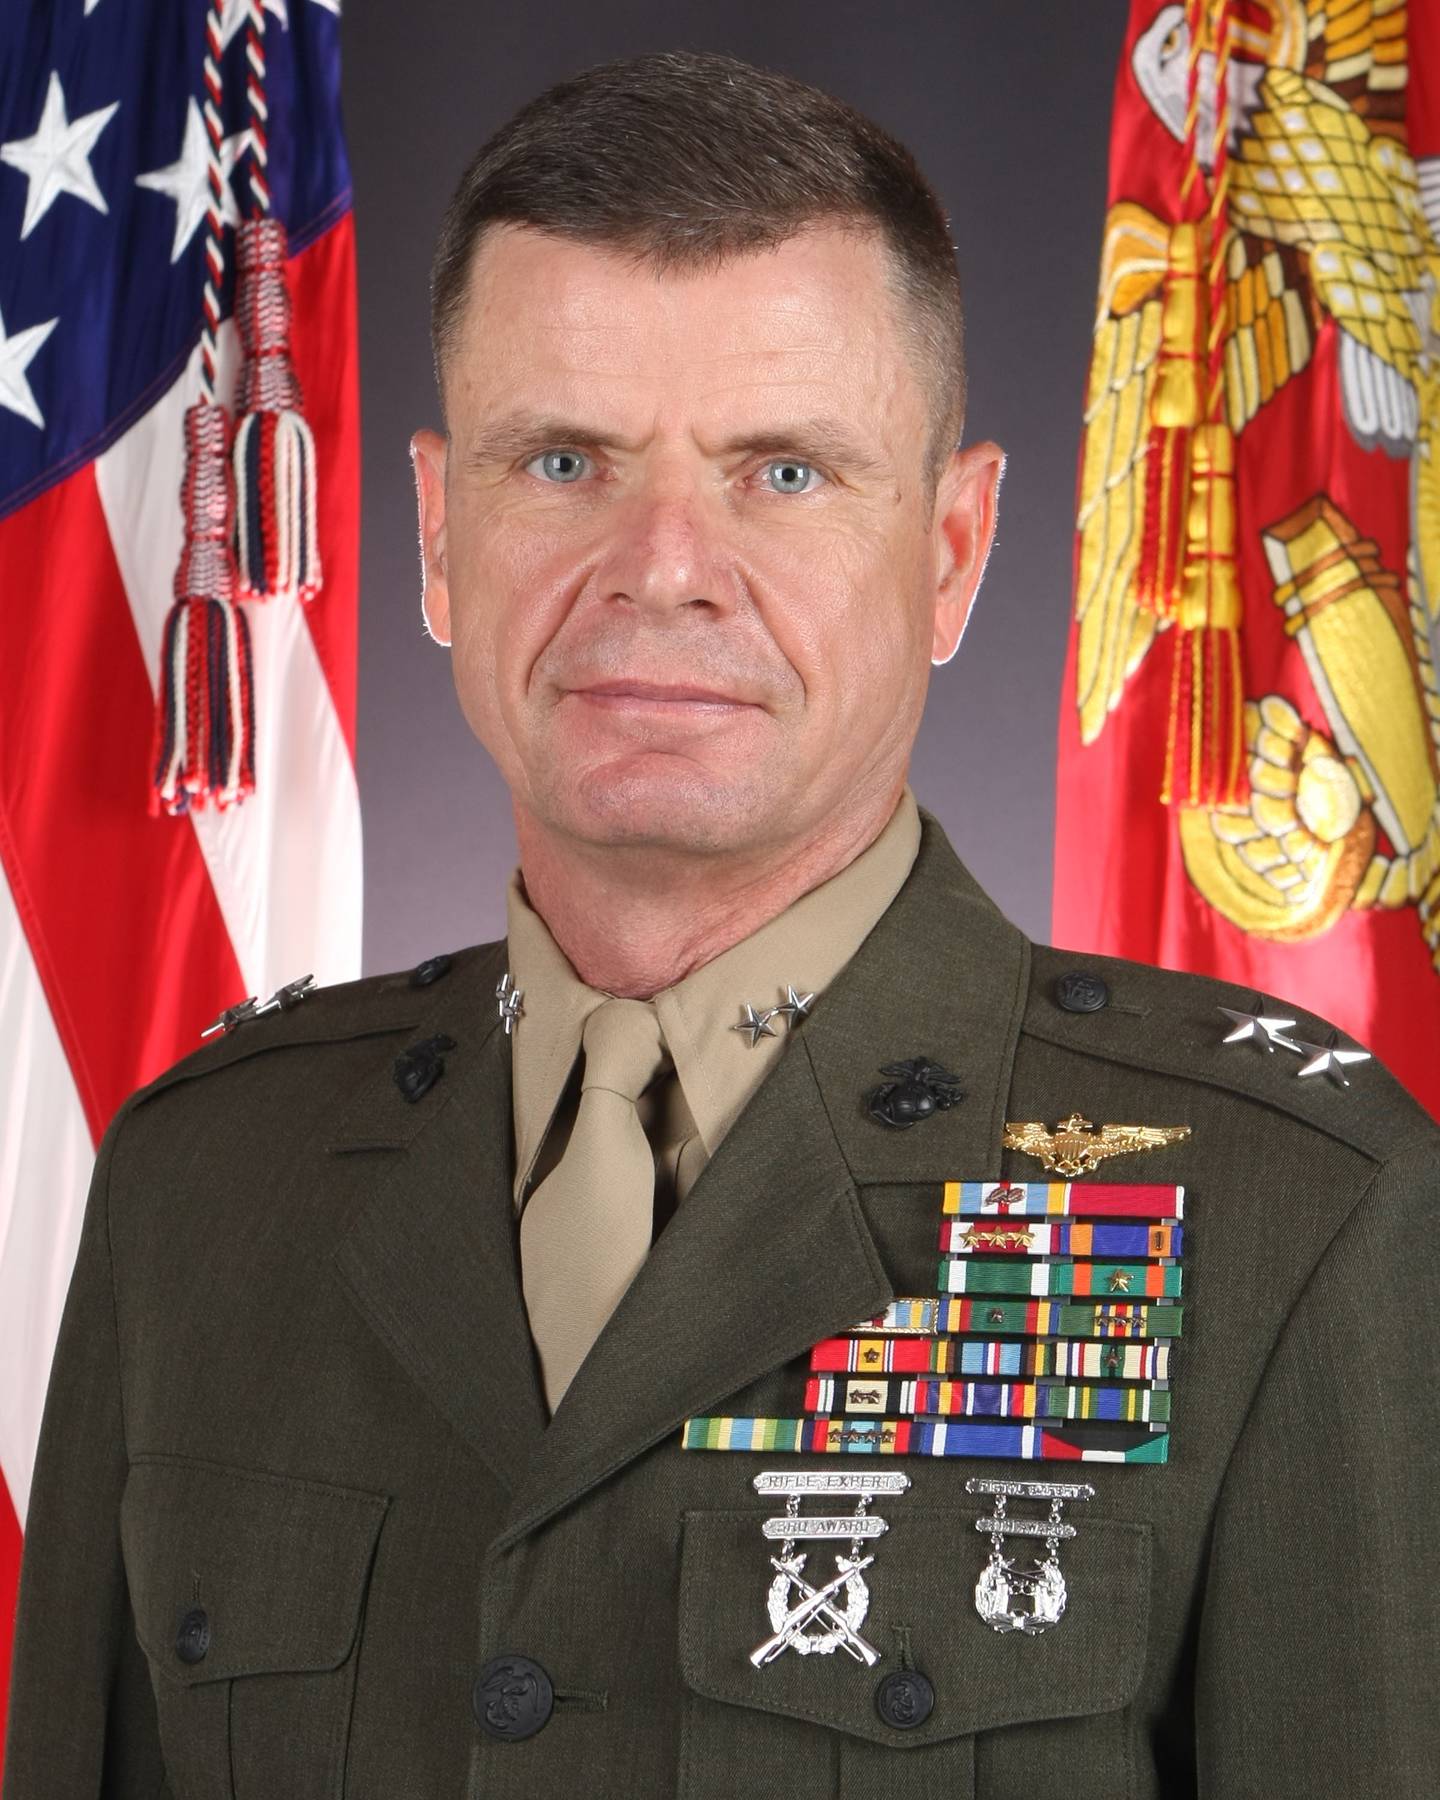 Two Marine generals tapped for new posts